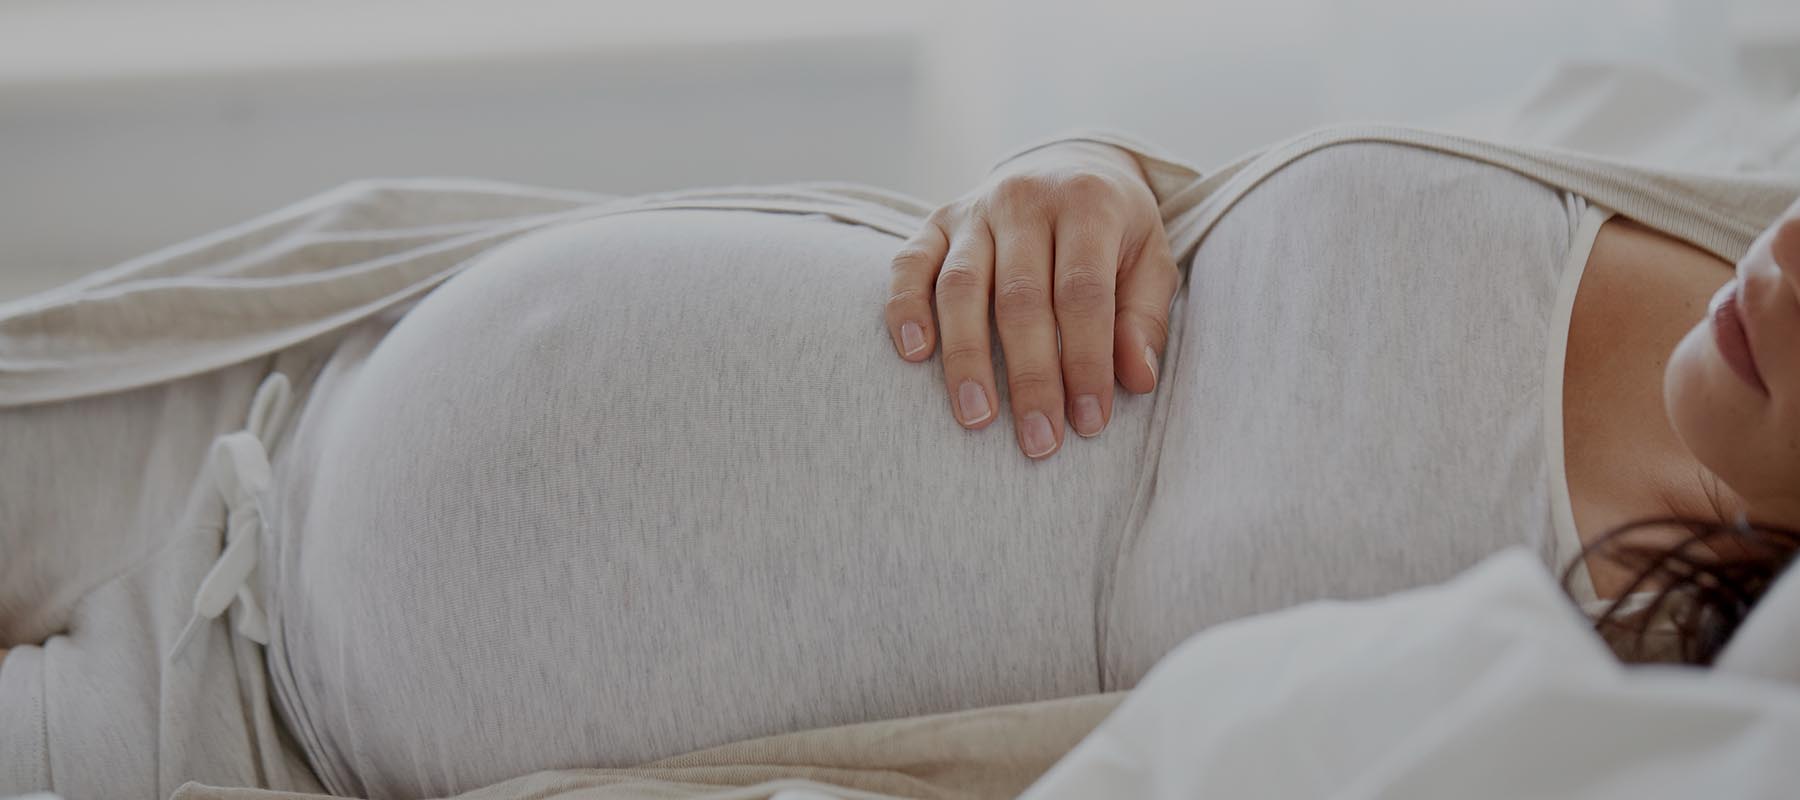 How To Sleep While Pregnant (8 Tips)